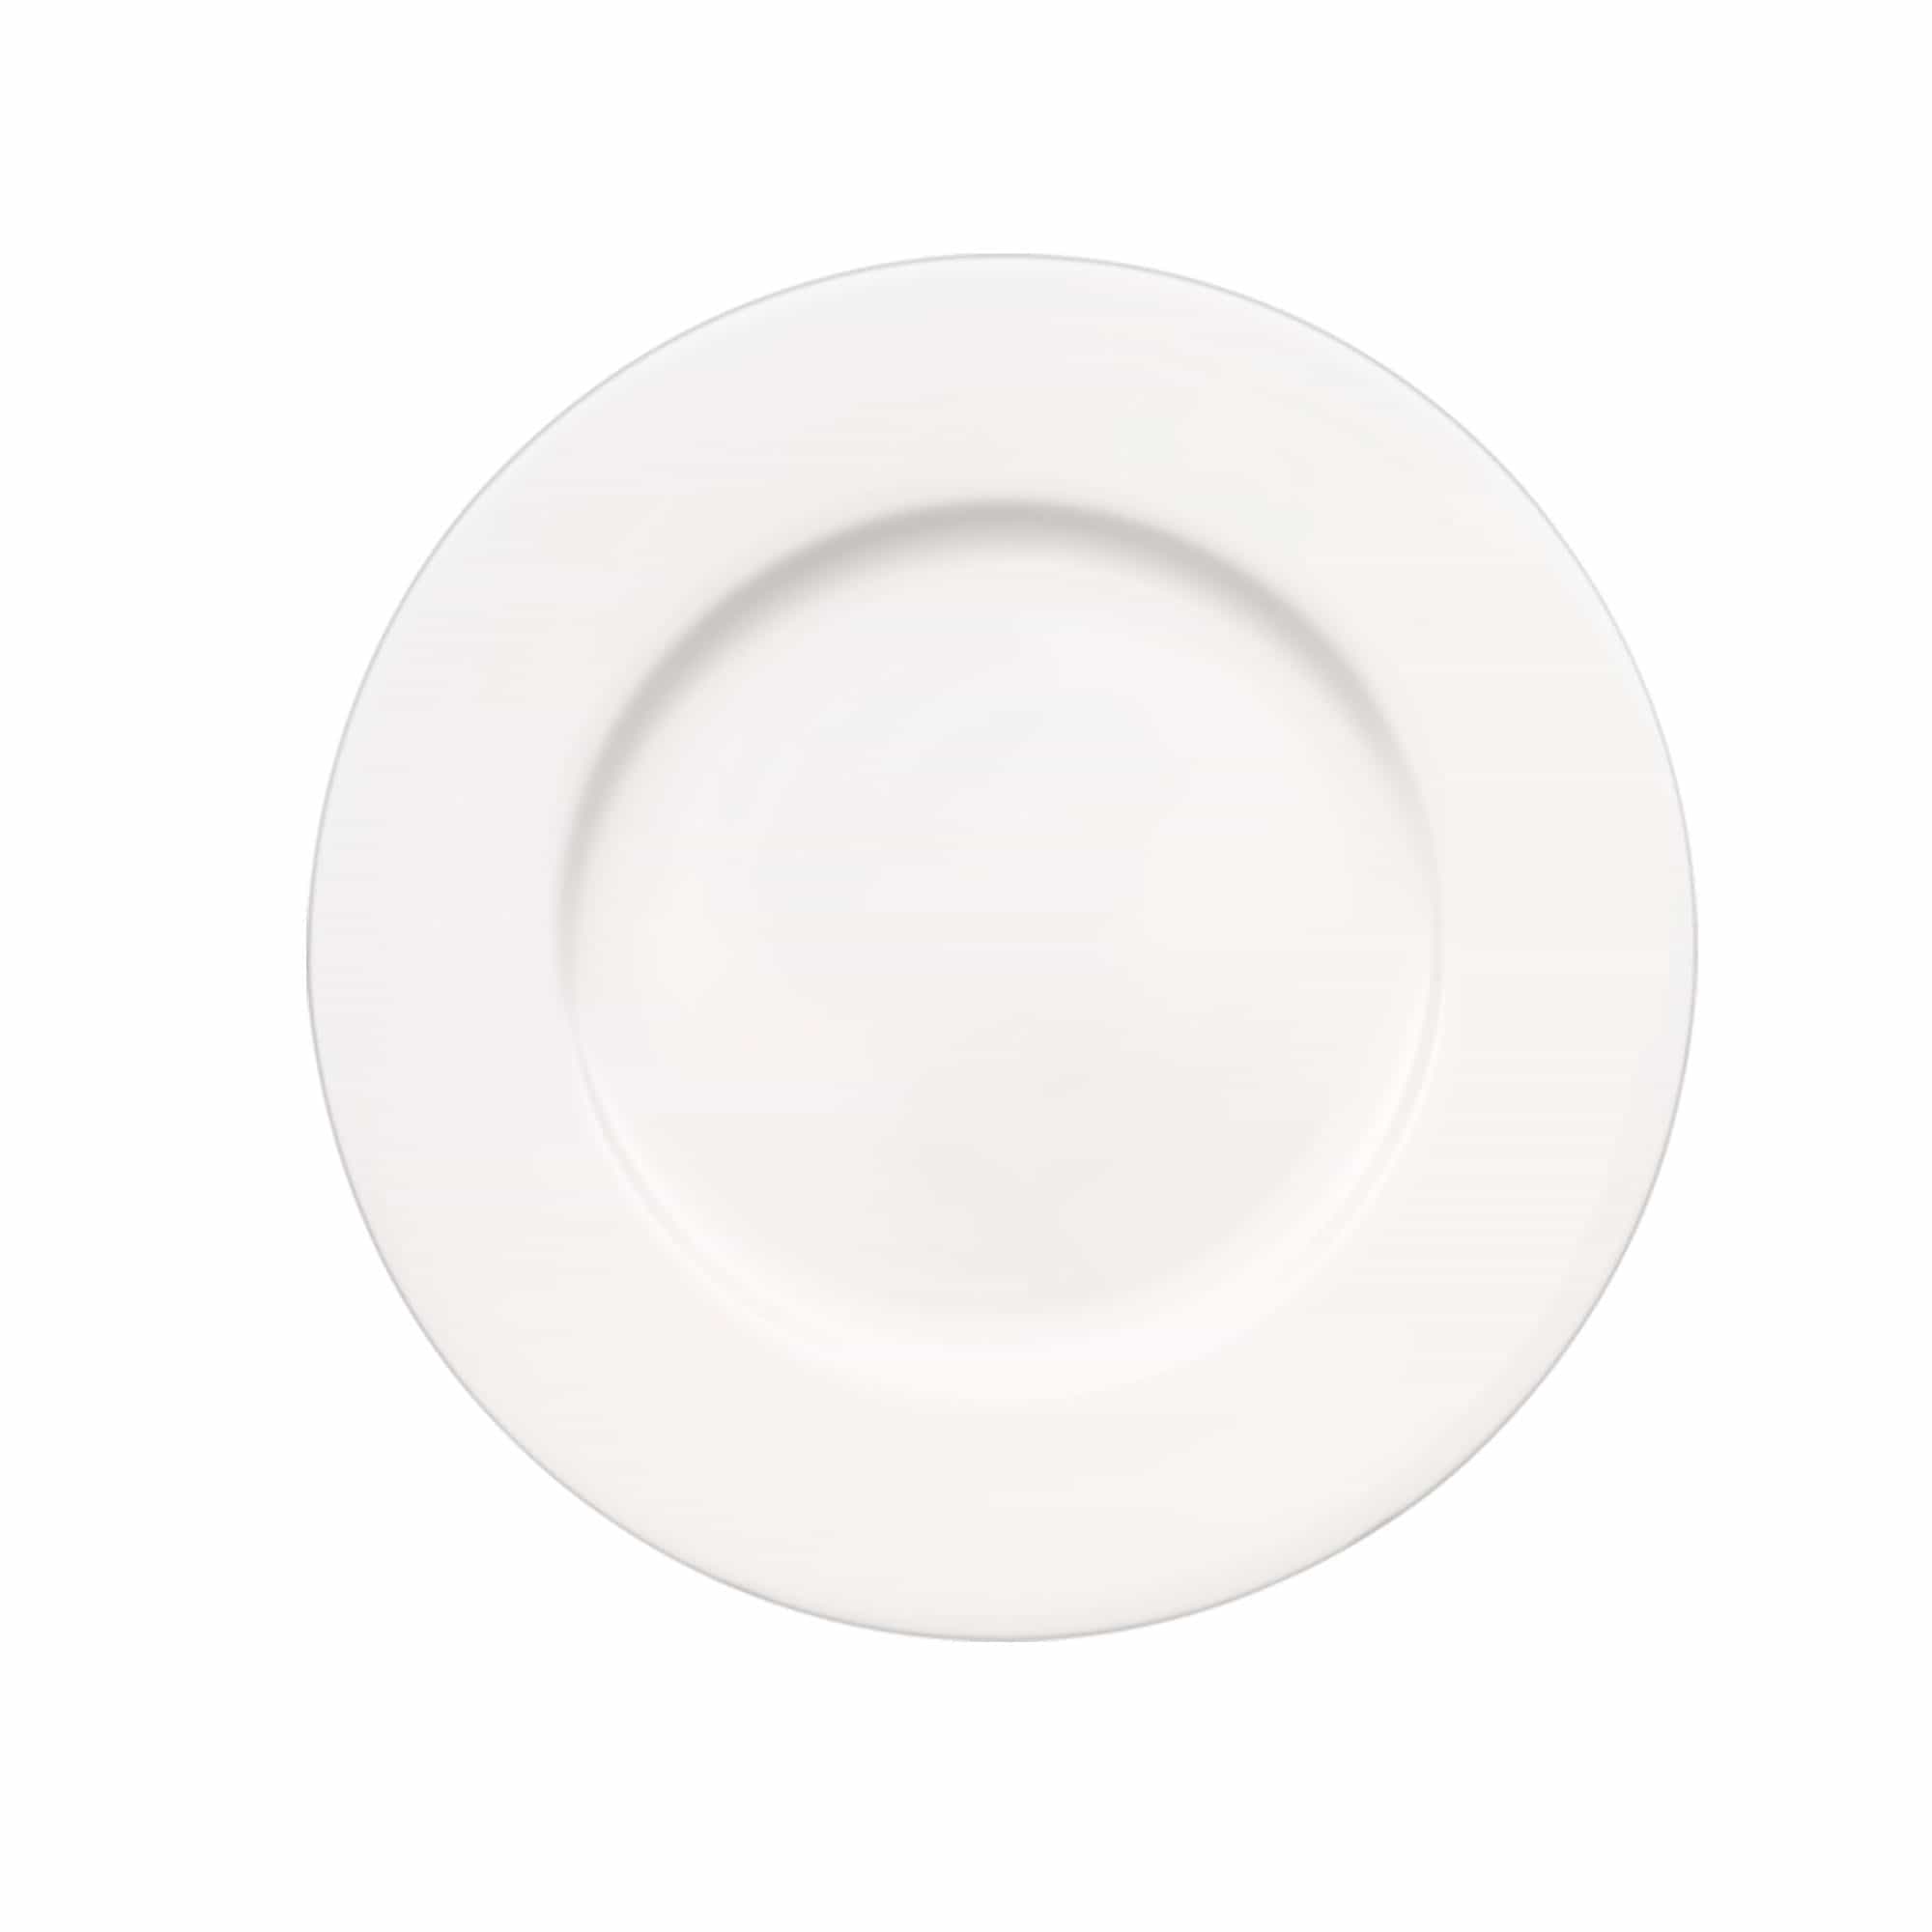 Anmut Bread Plate